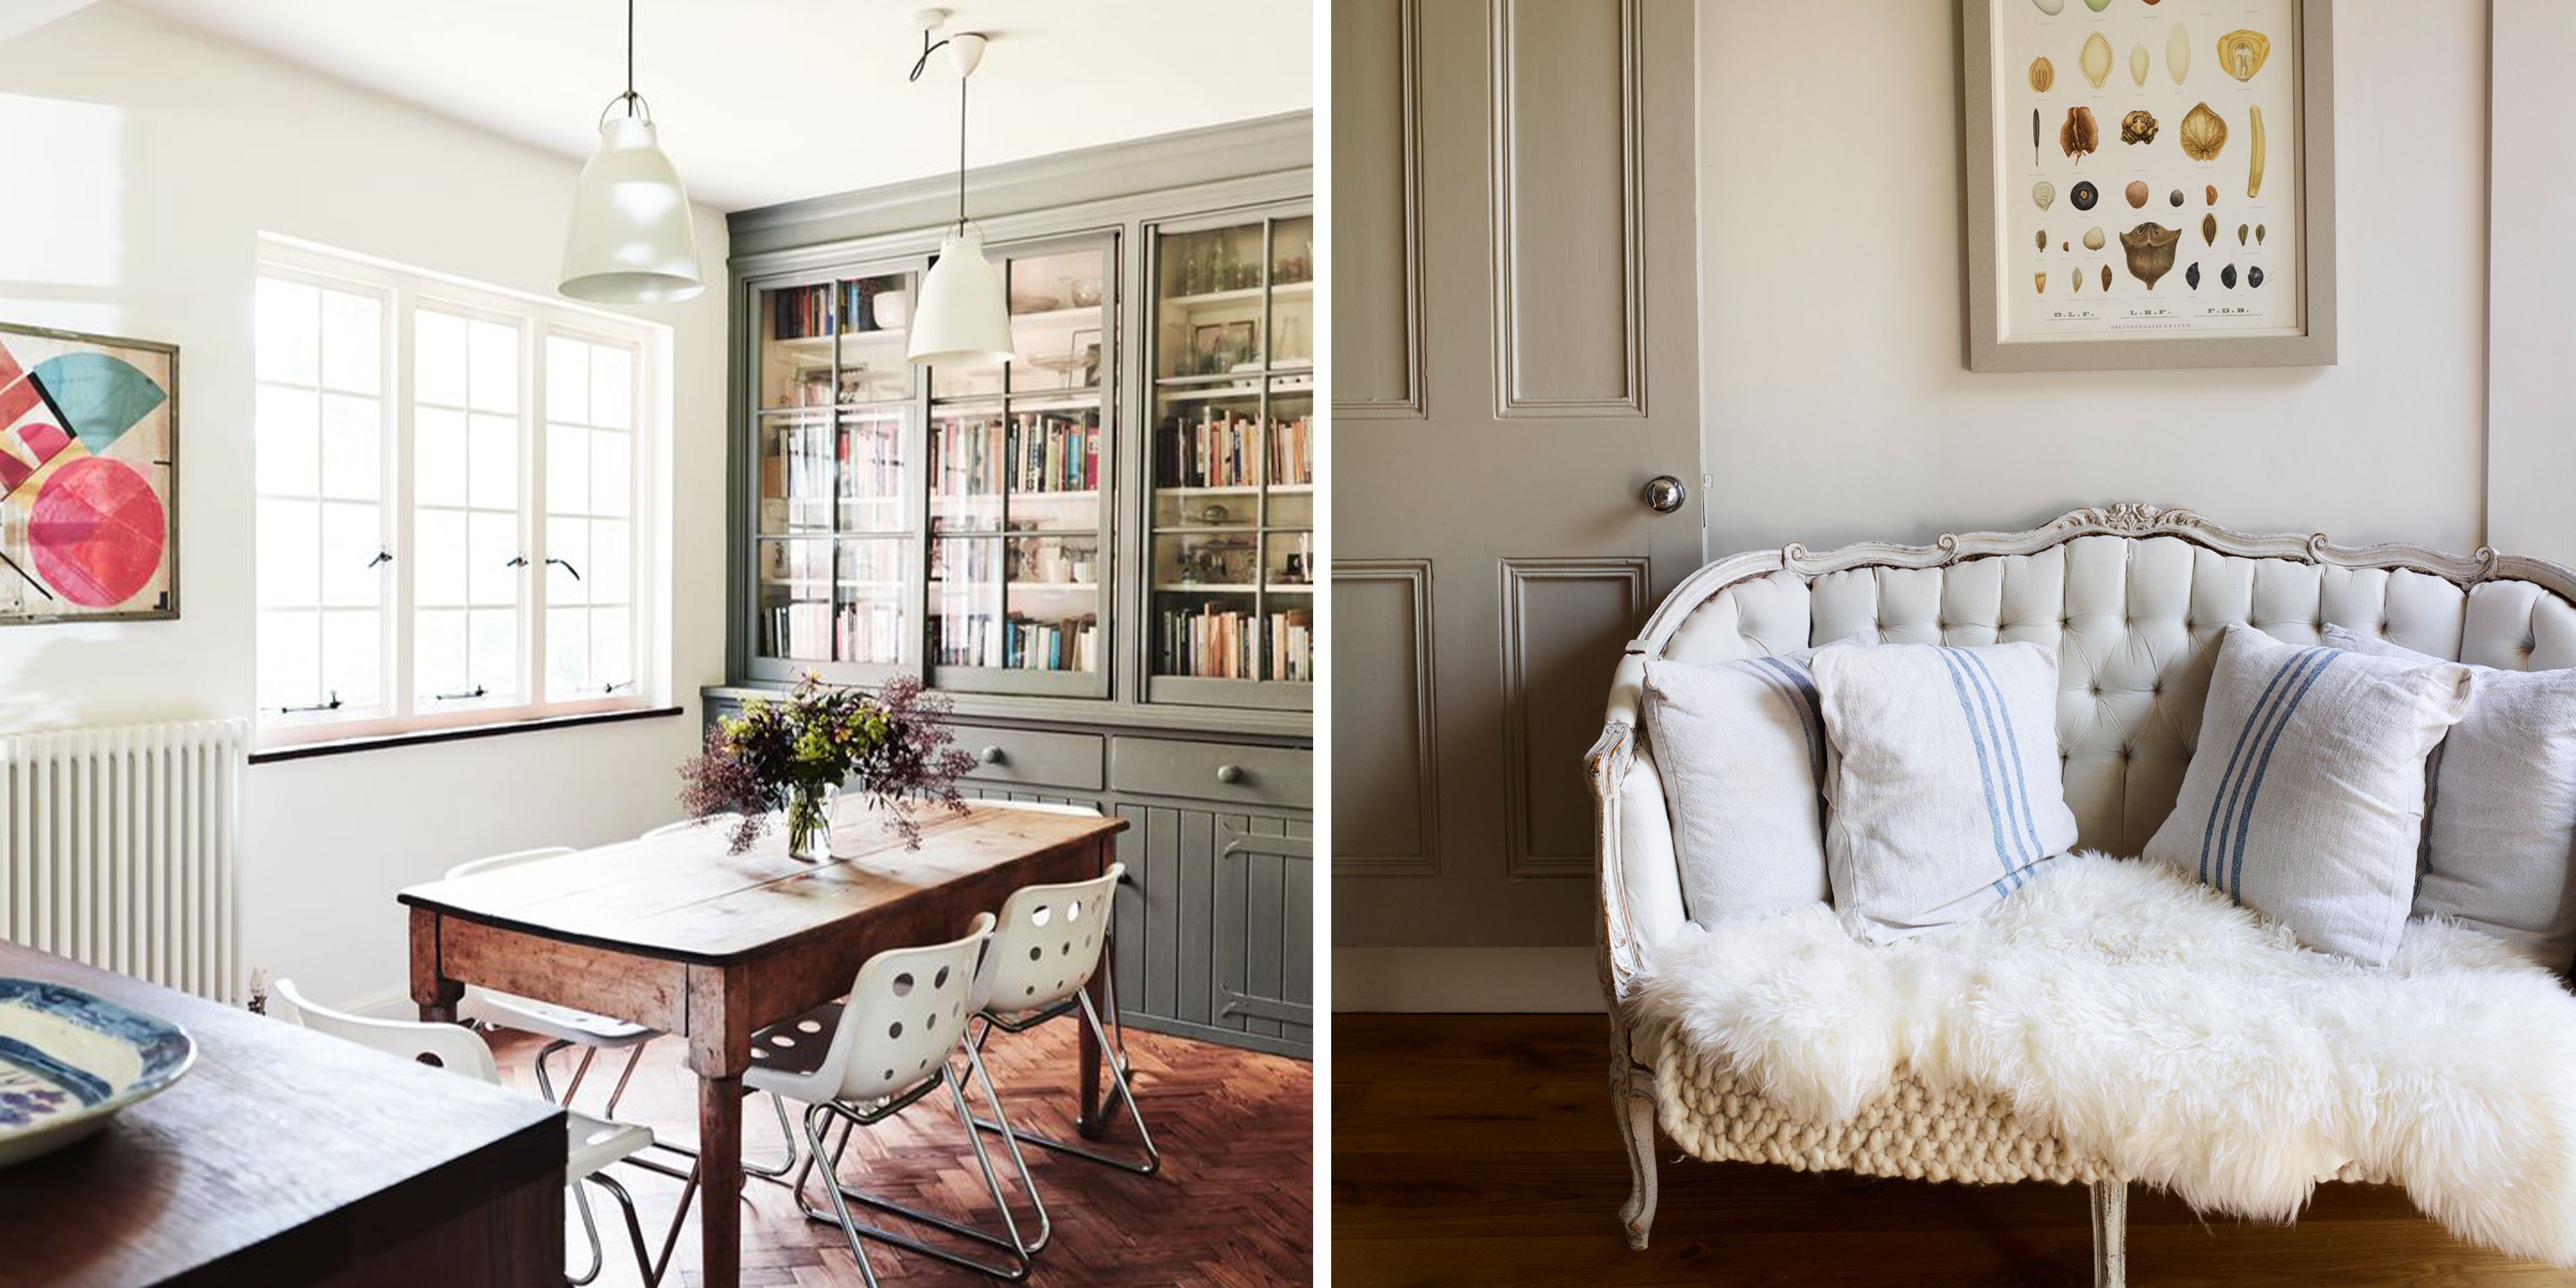 How To Buy Vintage And Antique Furniture: Treasure-Hunting Tips